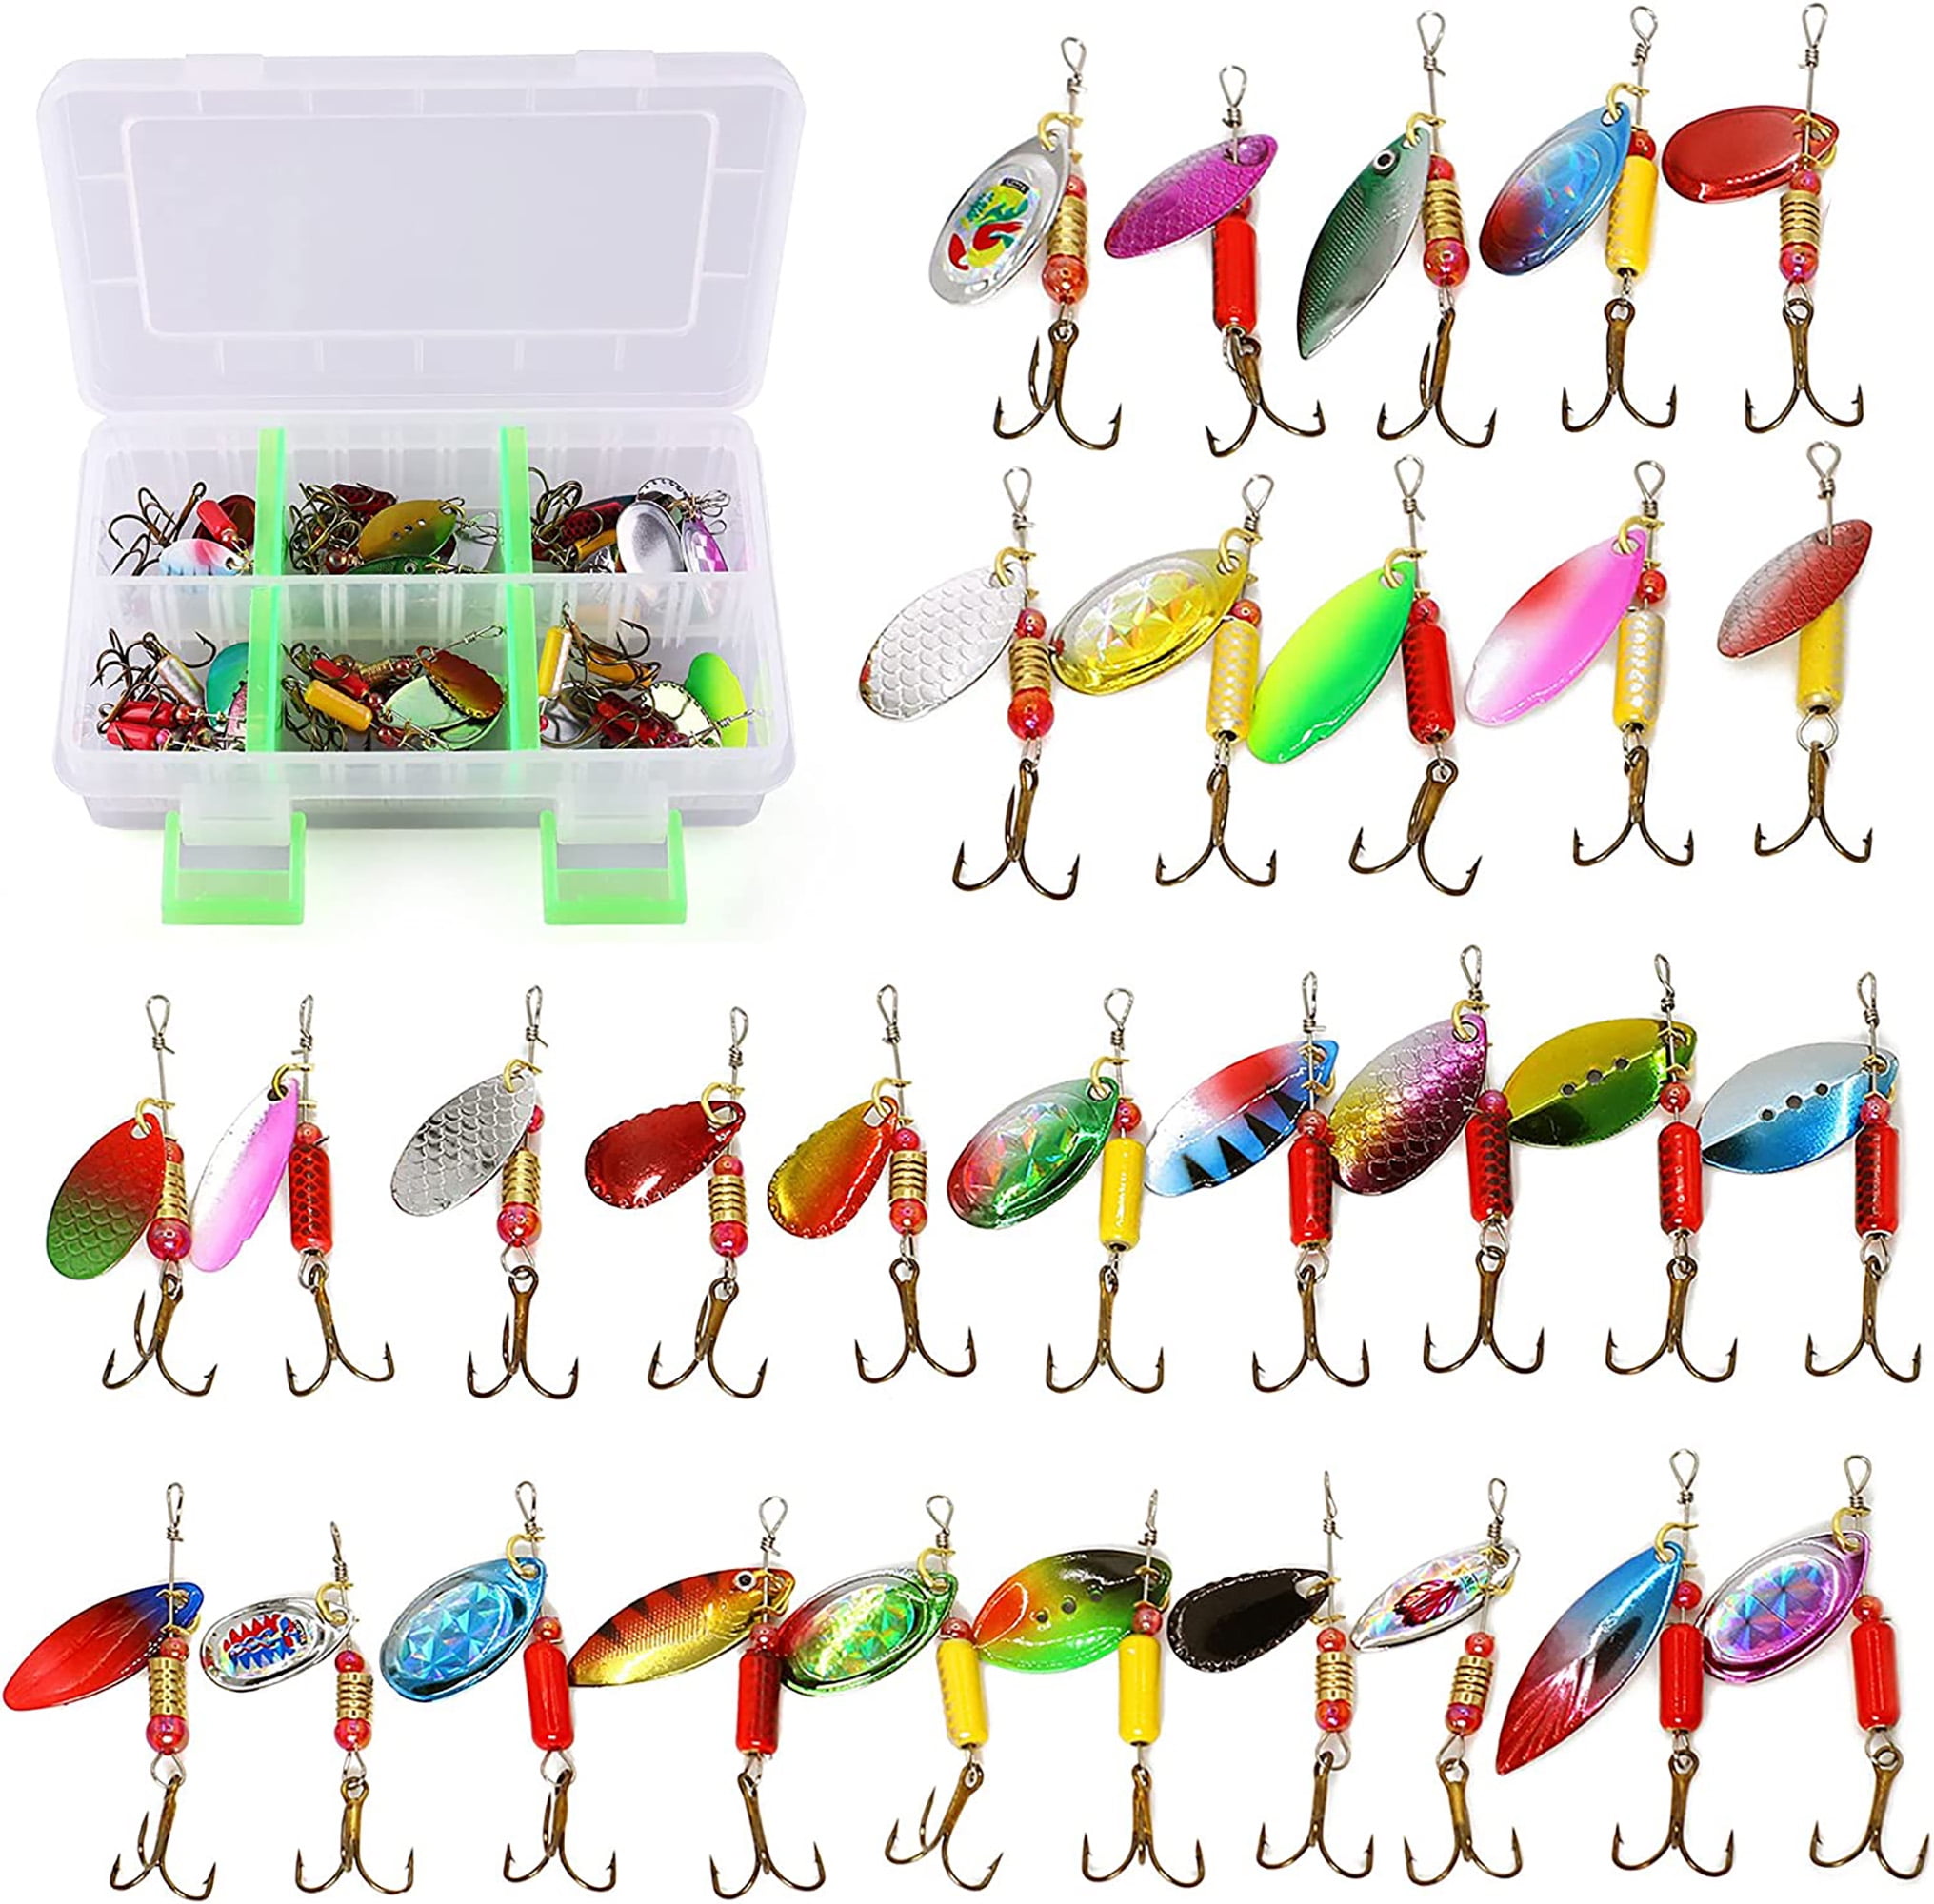 Creme Lure Panfish Book-Kit, Contains All You Will Need To Catch